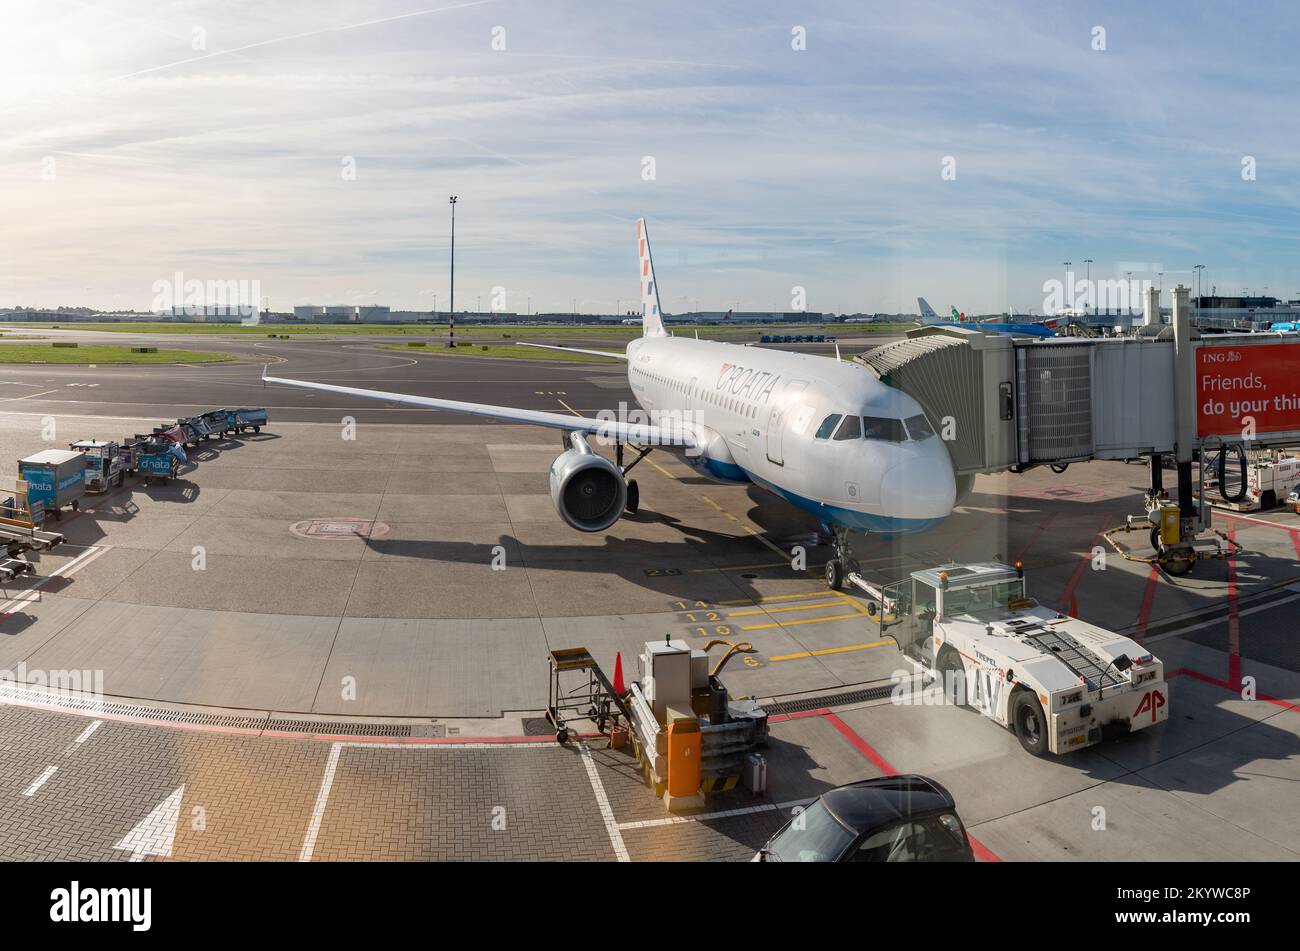 A picture of a Croatia Airlines plane in the Schiphol Airport. Stock Photo